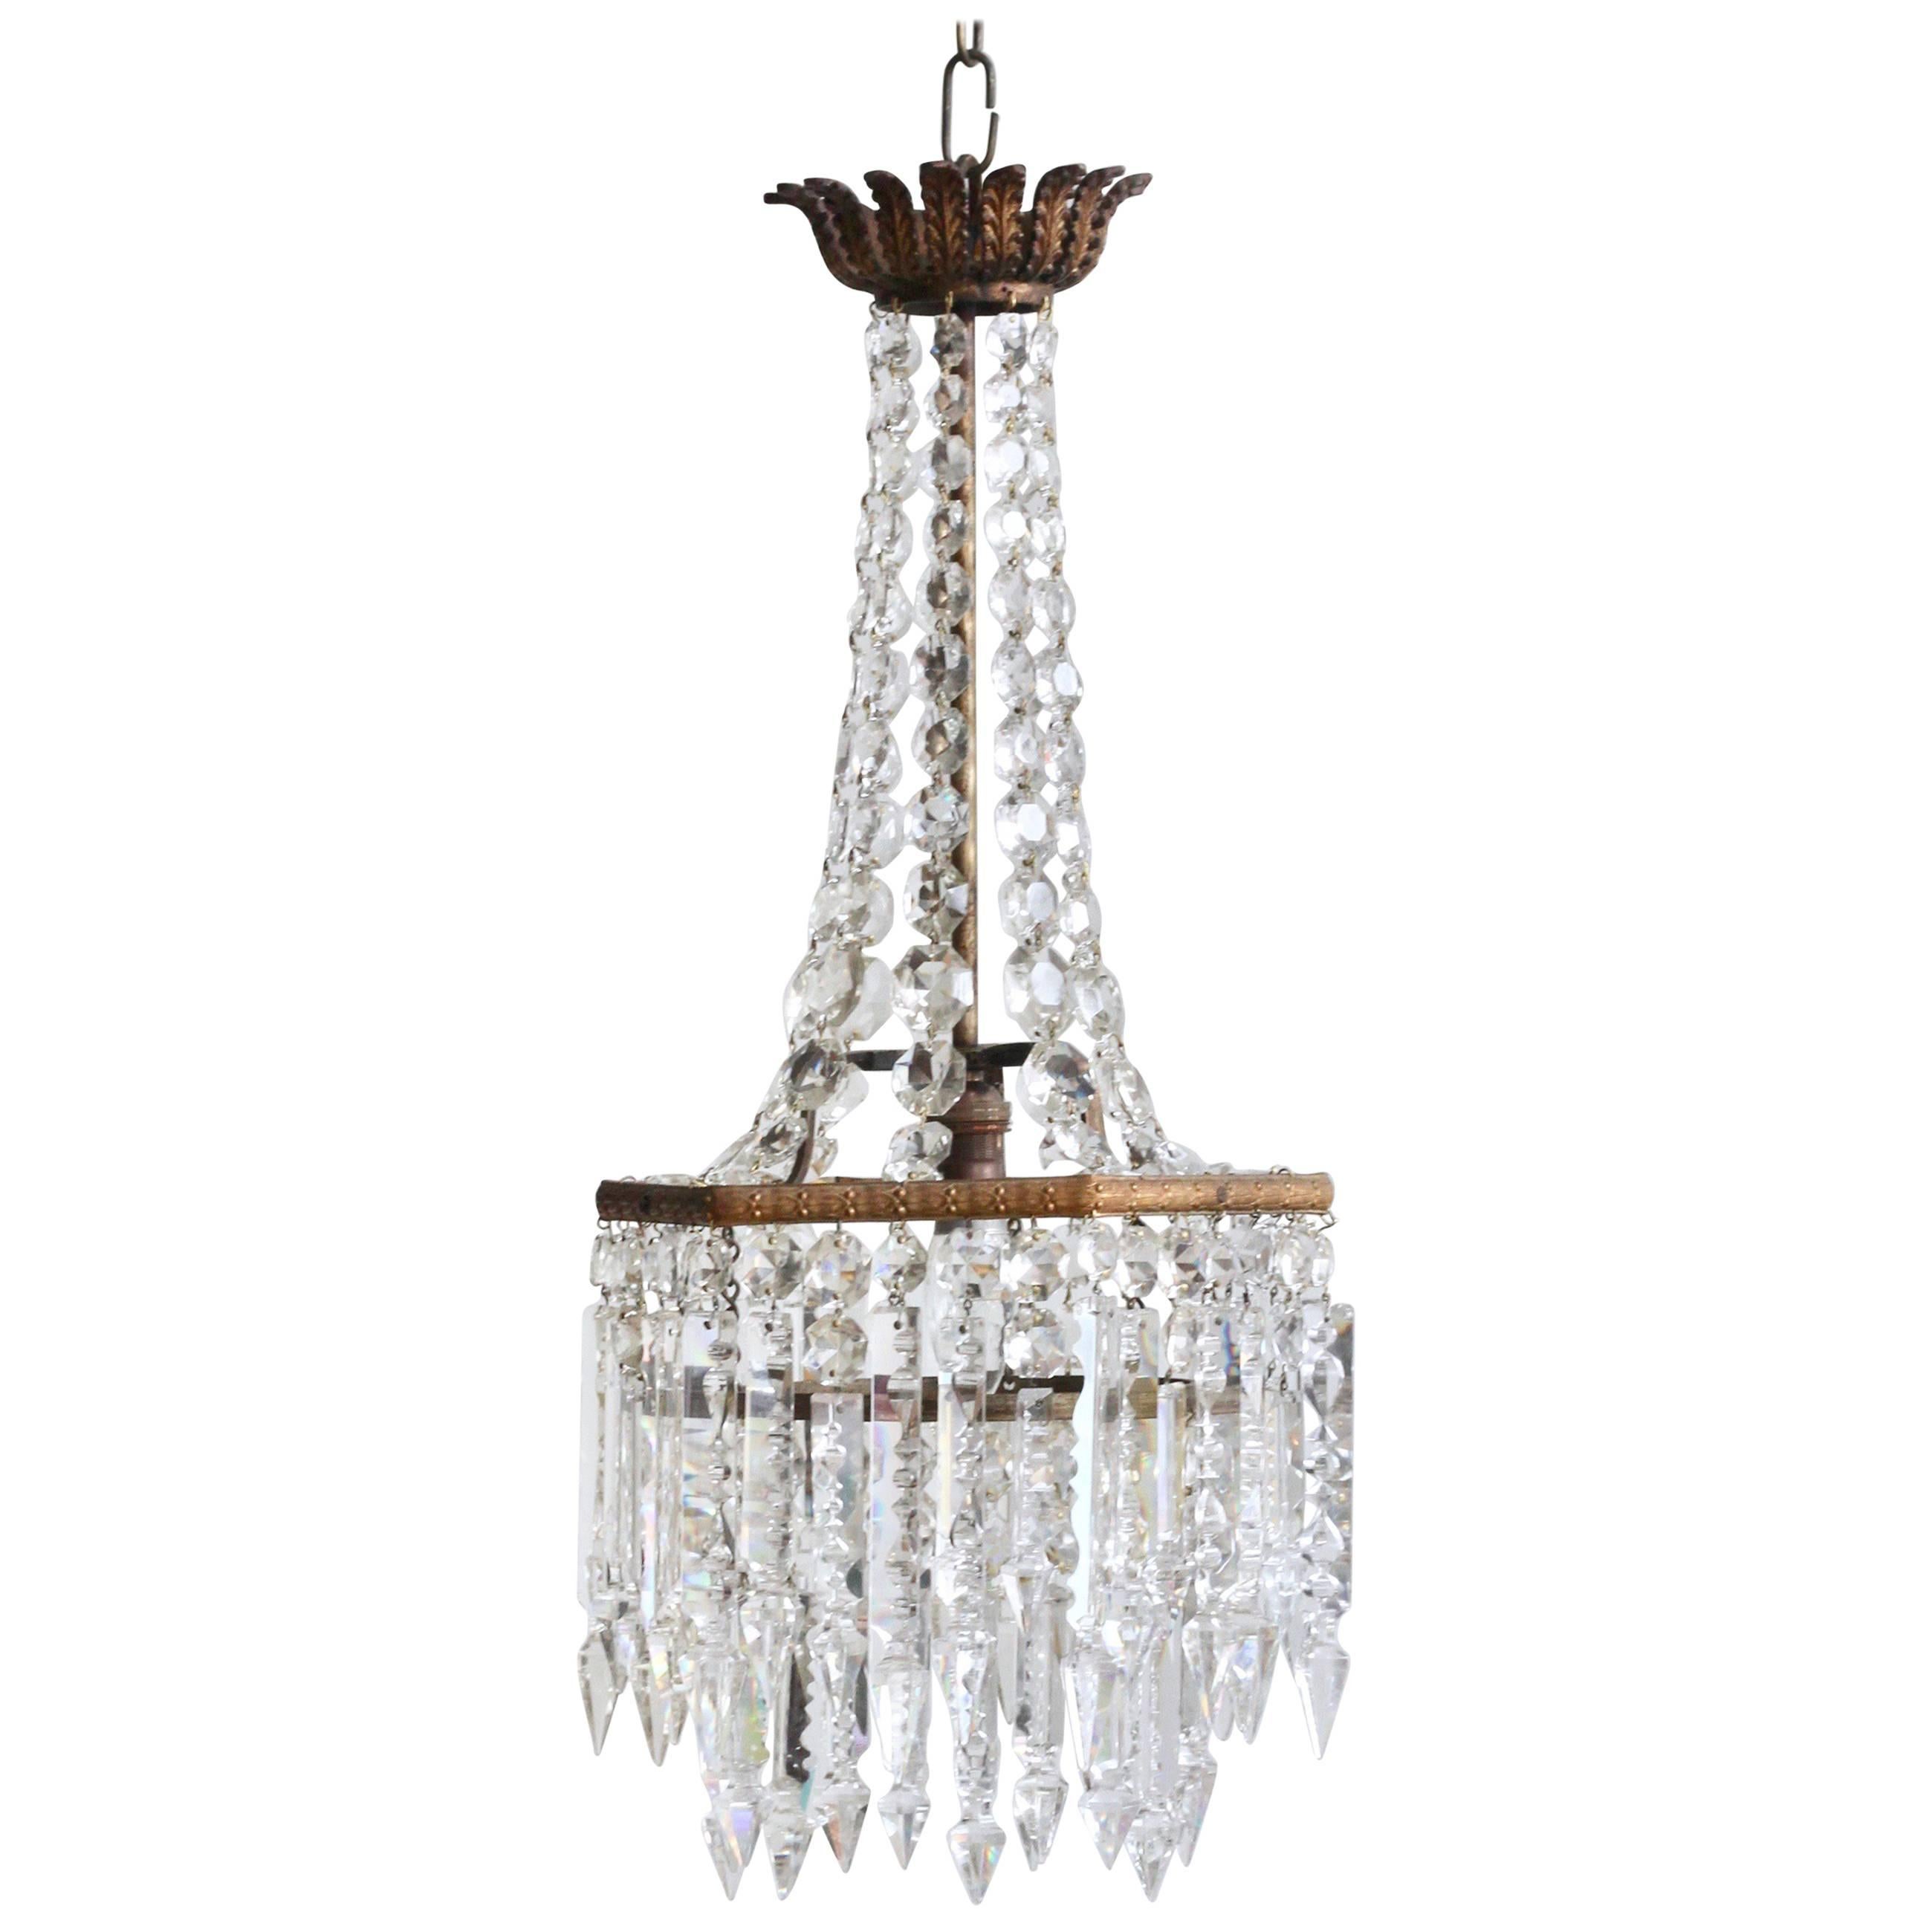 Early 20th Century English Crystal Chandelier with Prince Albert Crystal Lusters